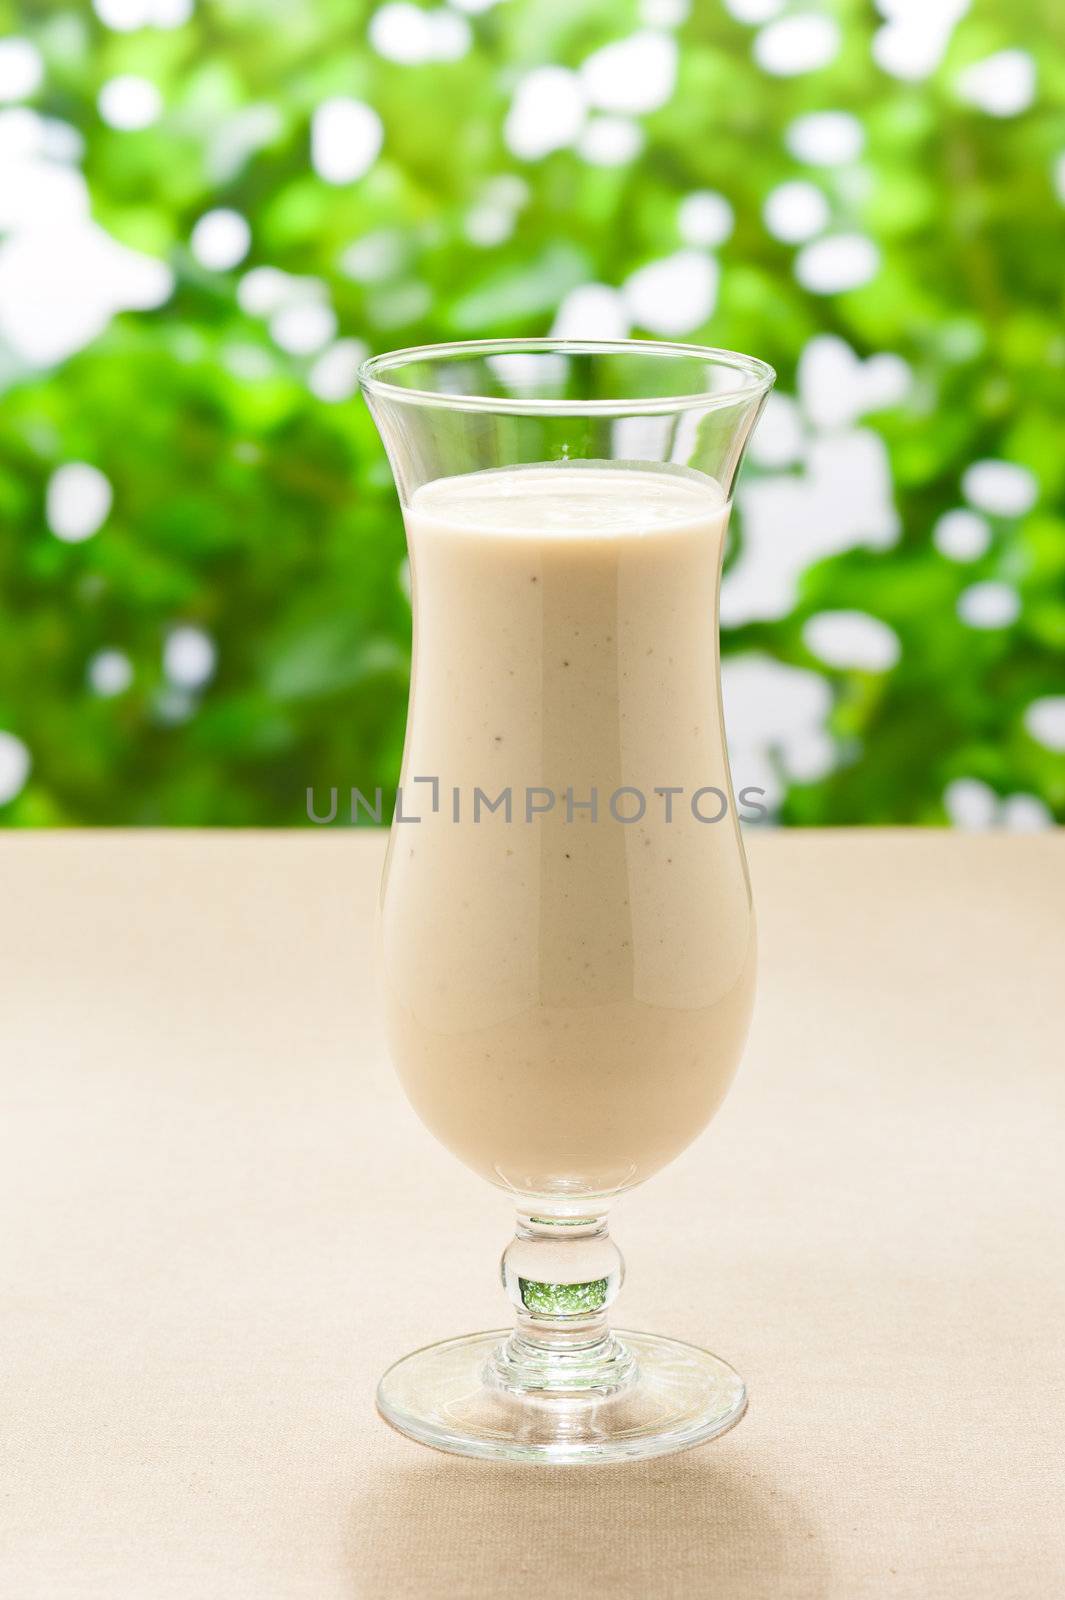 Banana milk shake with real fruit and a green background